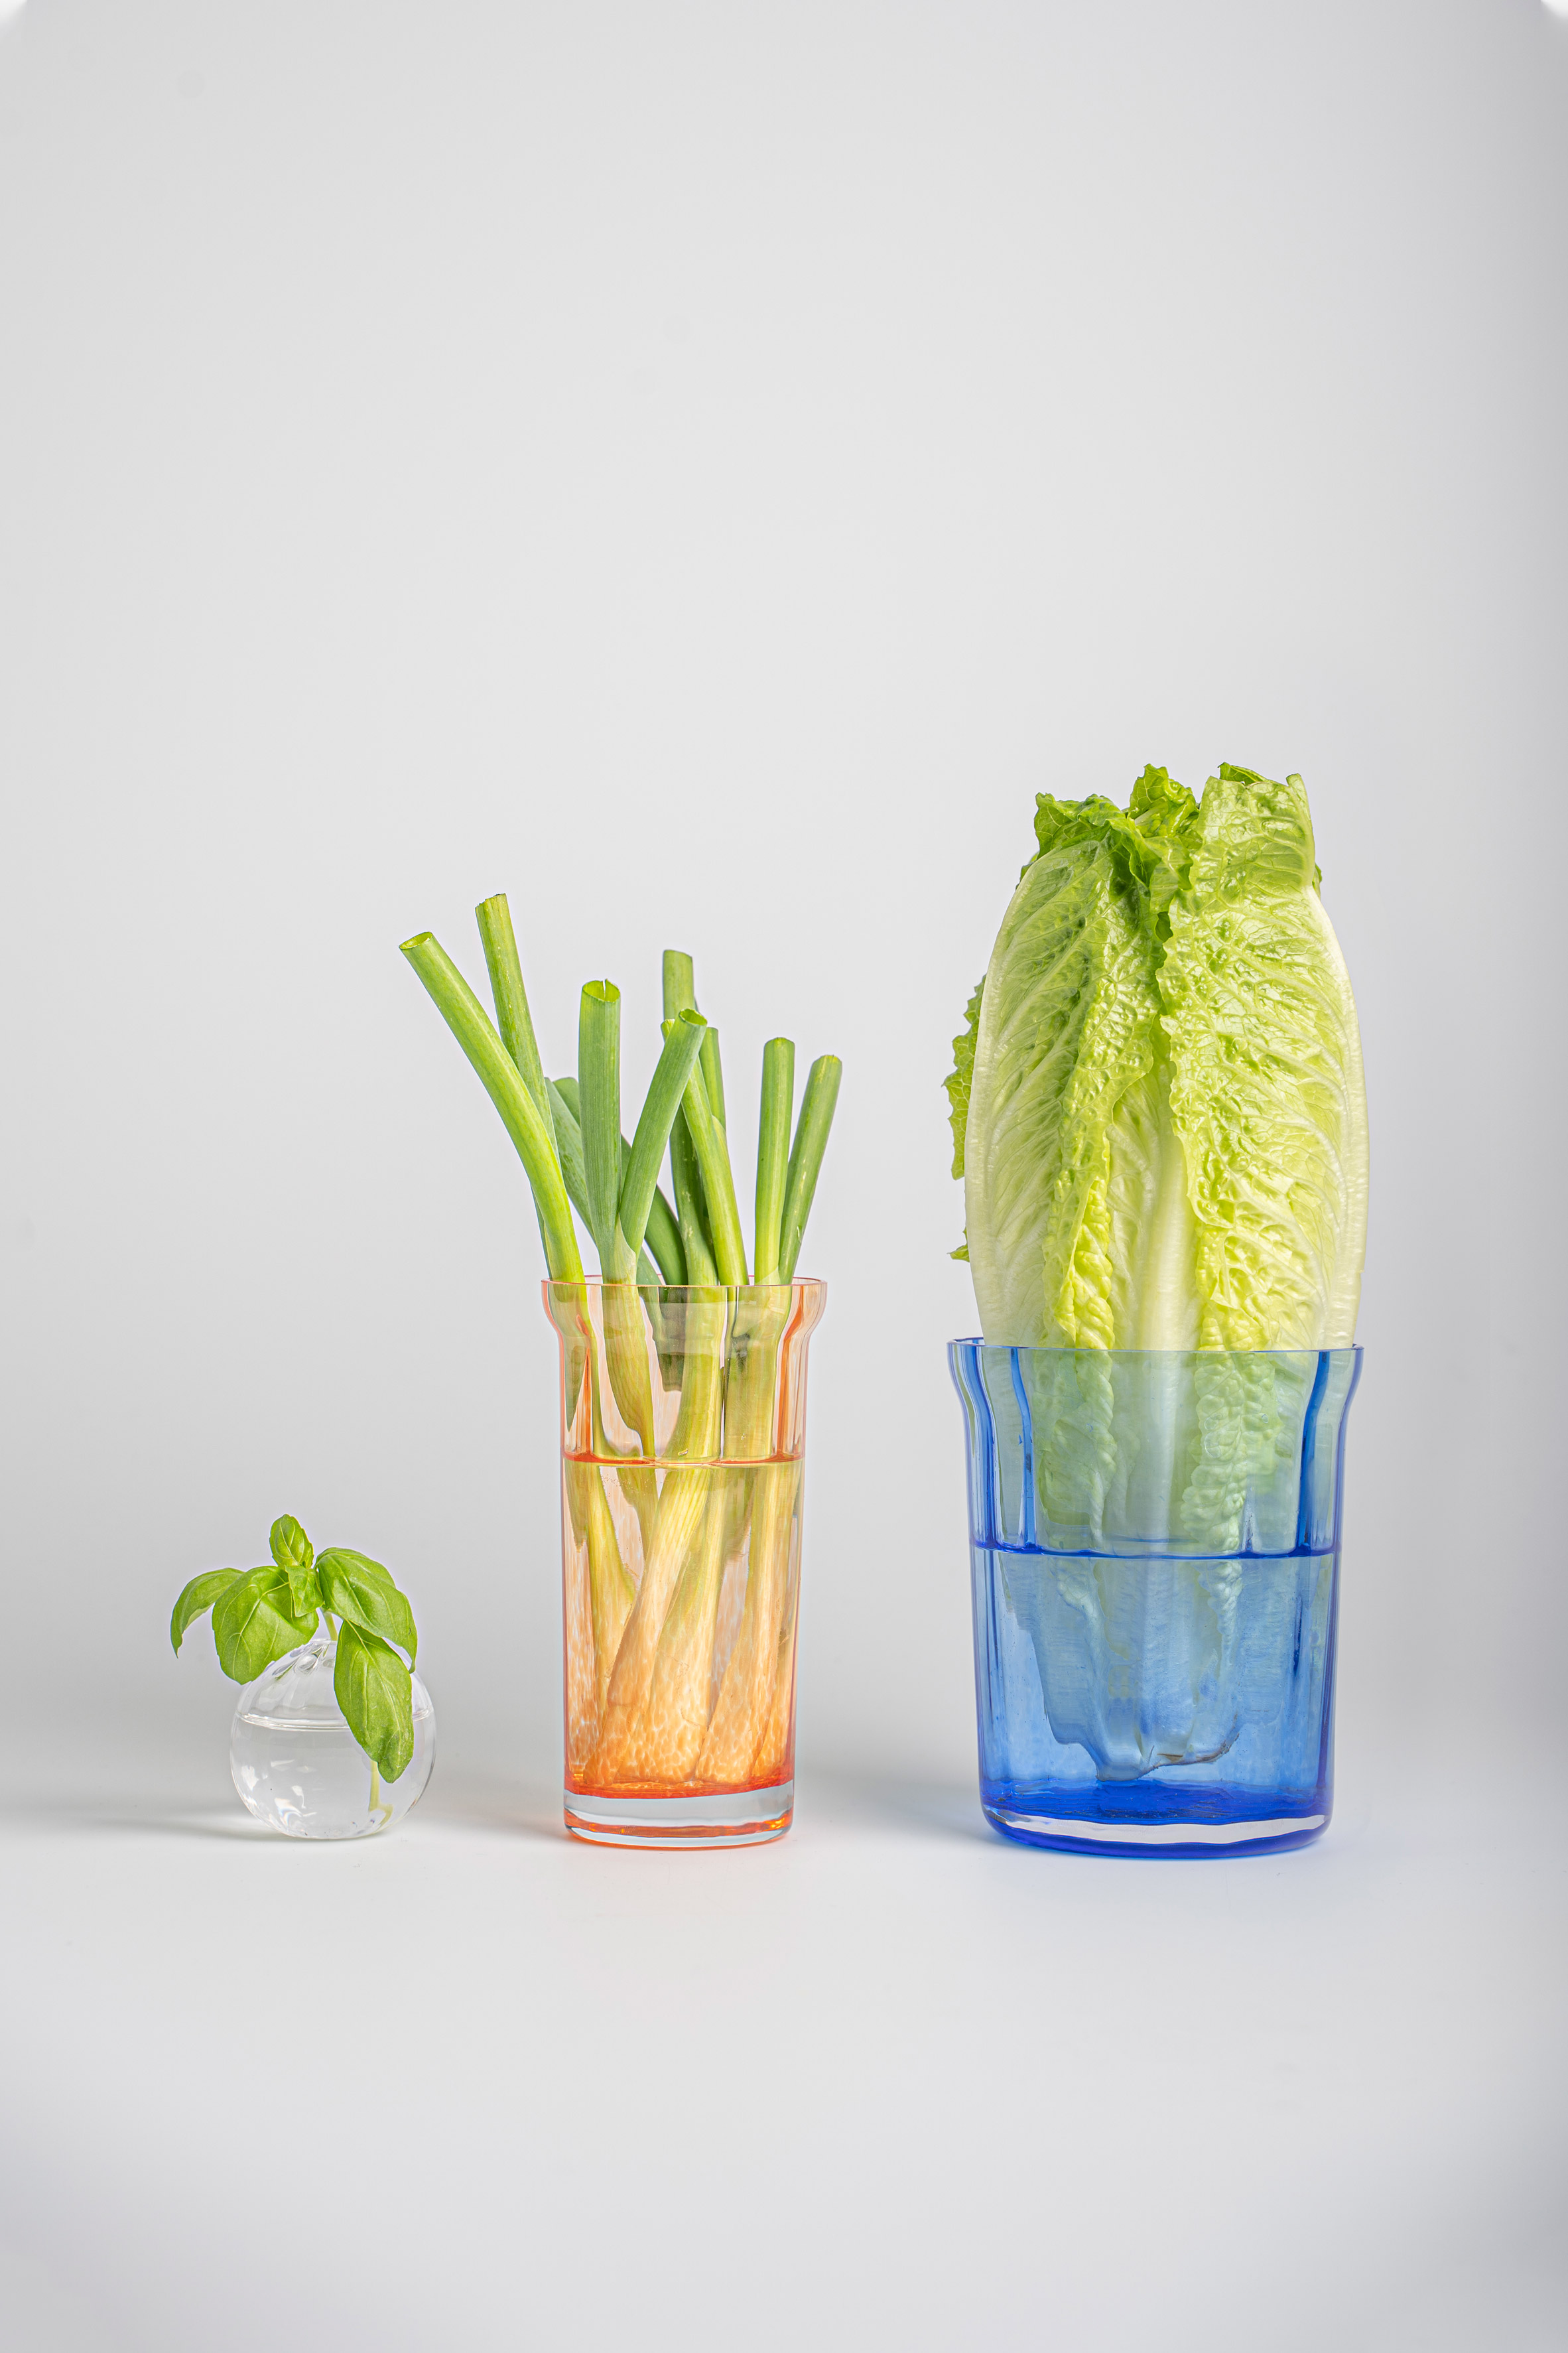 Lund University students cast household items in glass instead of plastic